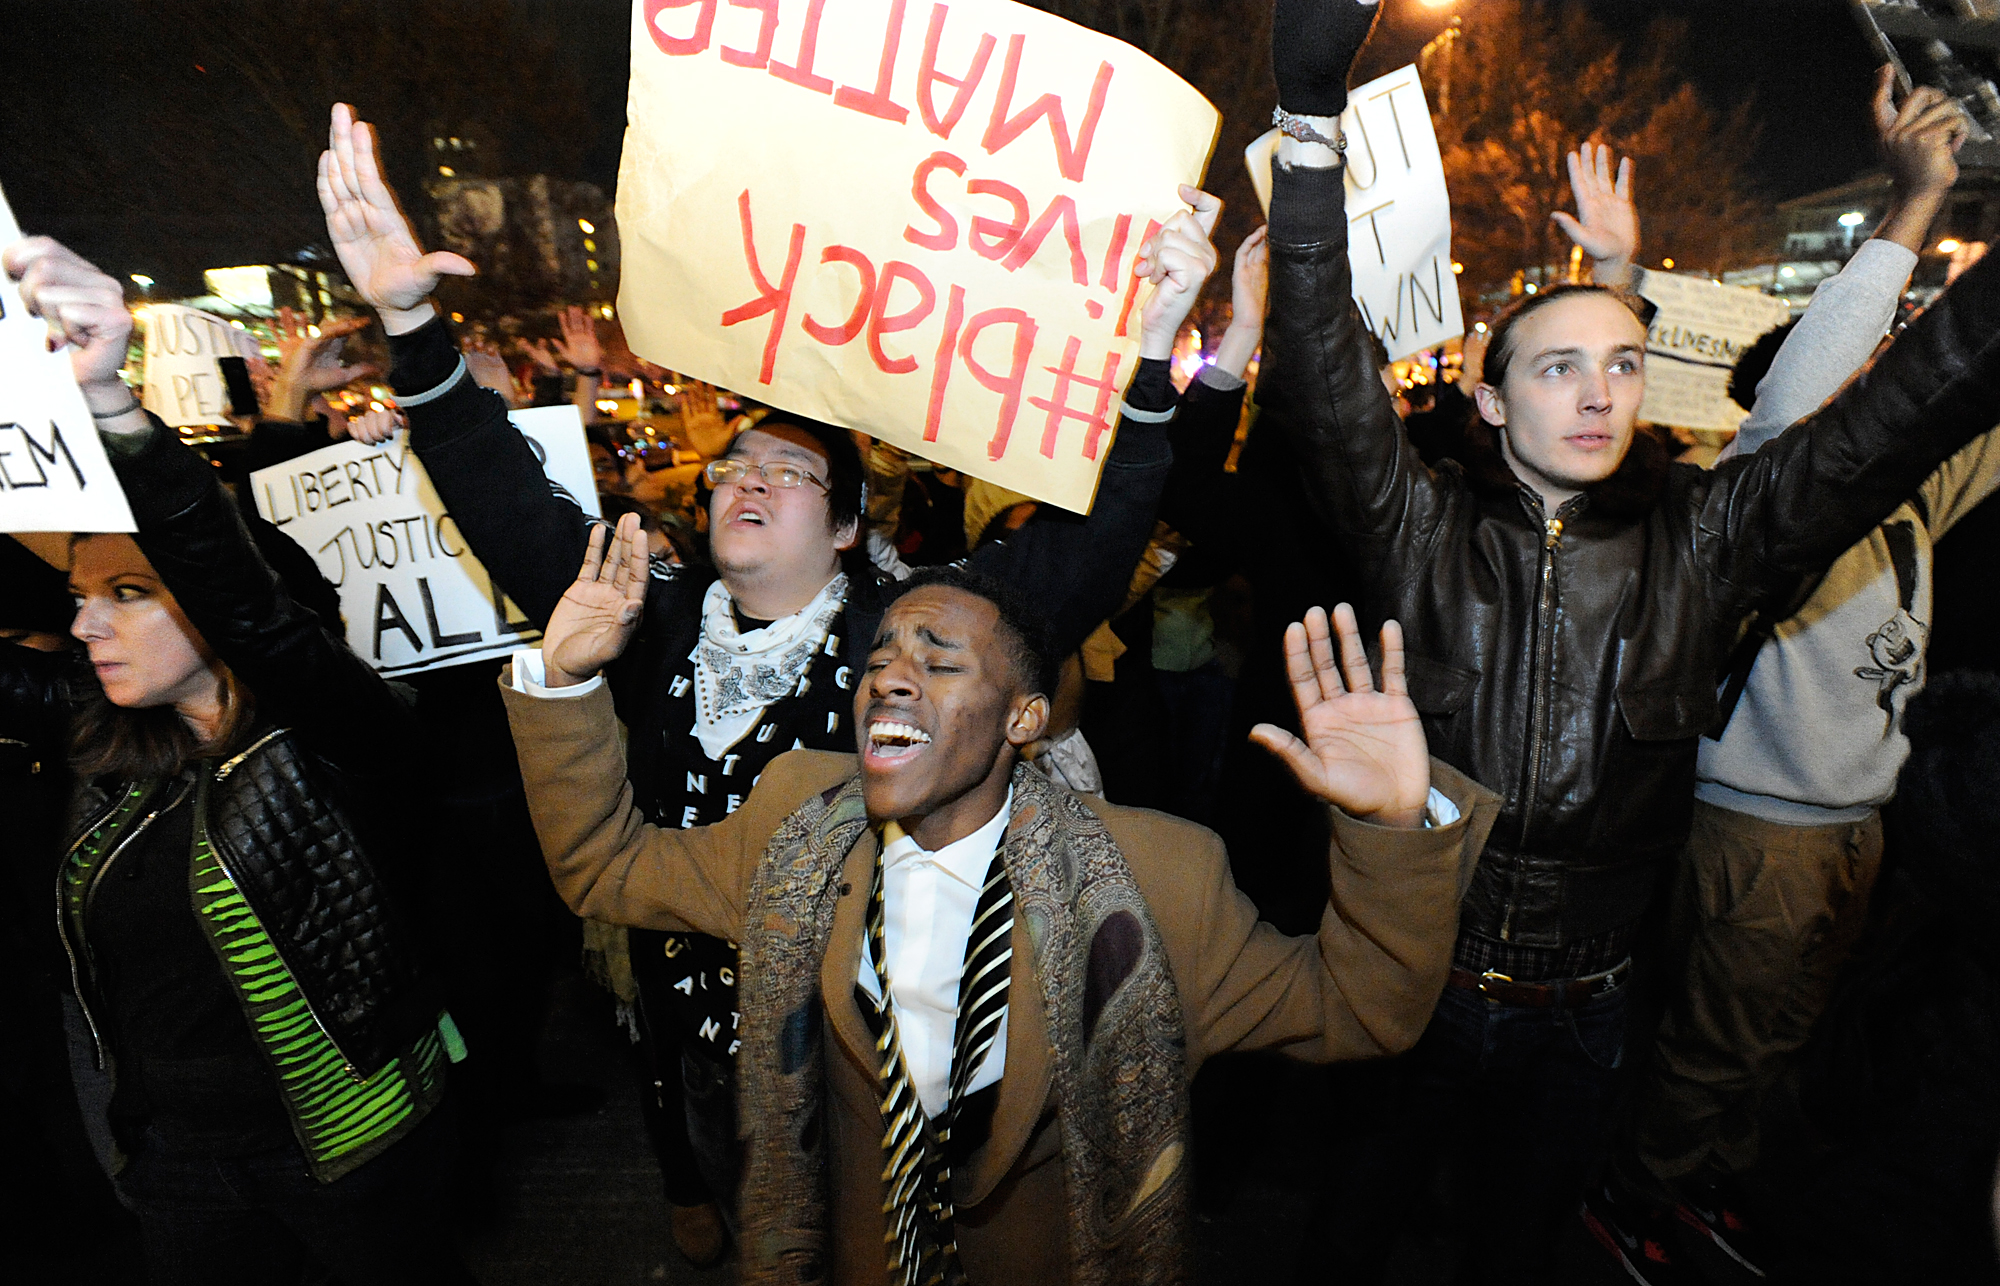 Protesters march in downtown Durham, N.C., Dec. 5, 2014 during a demonstration against the non-indictments of the police officers involved in the deaths of Michael Brown in Ferguson, Mo., and Eric Garner in New York City.